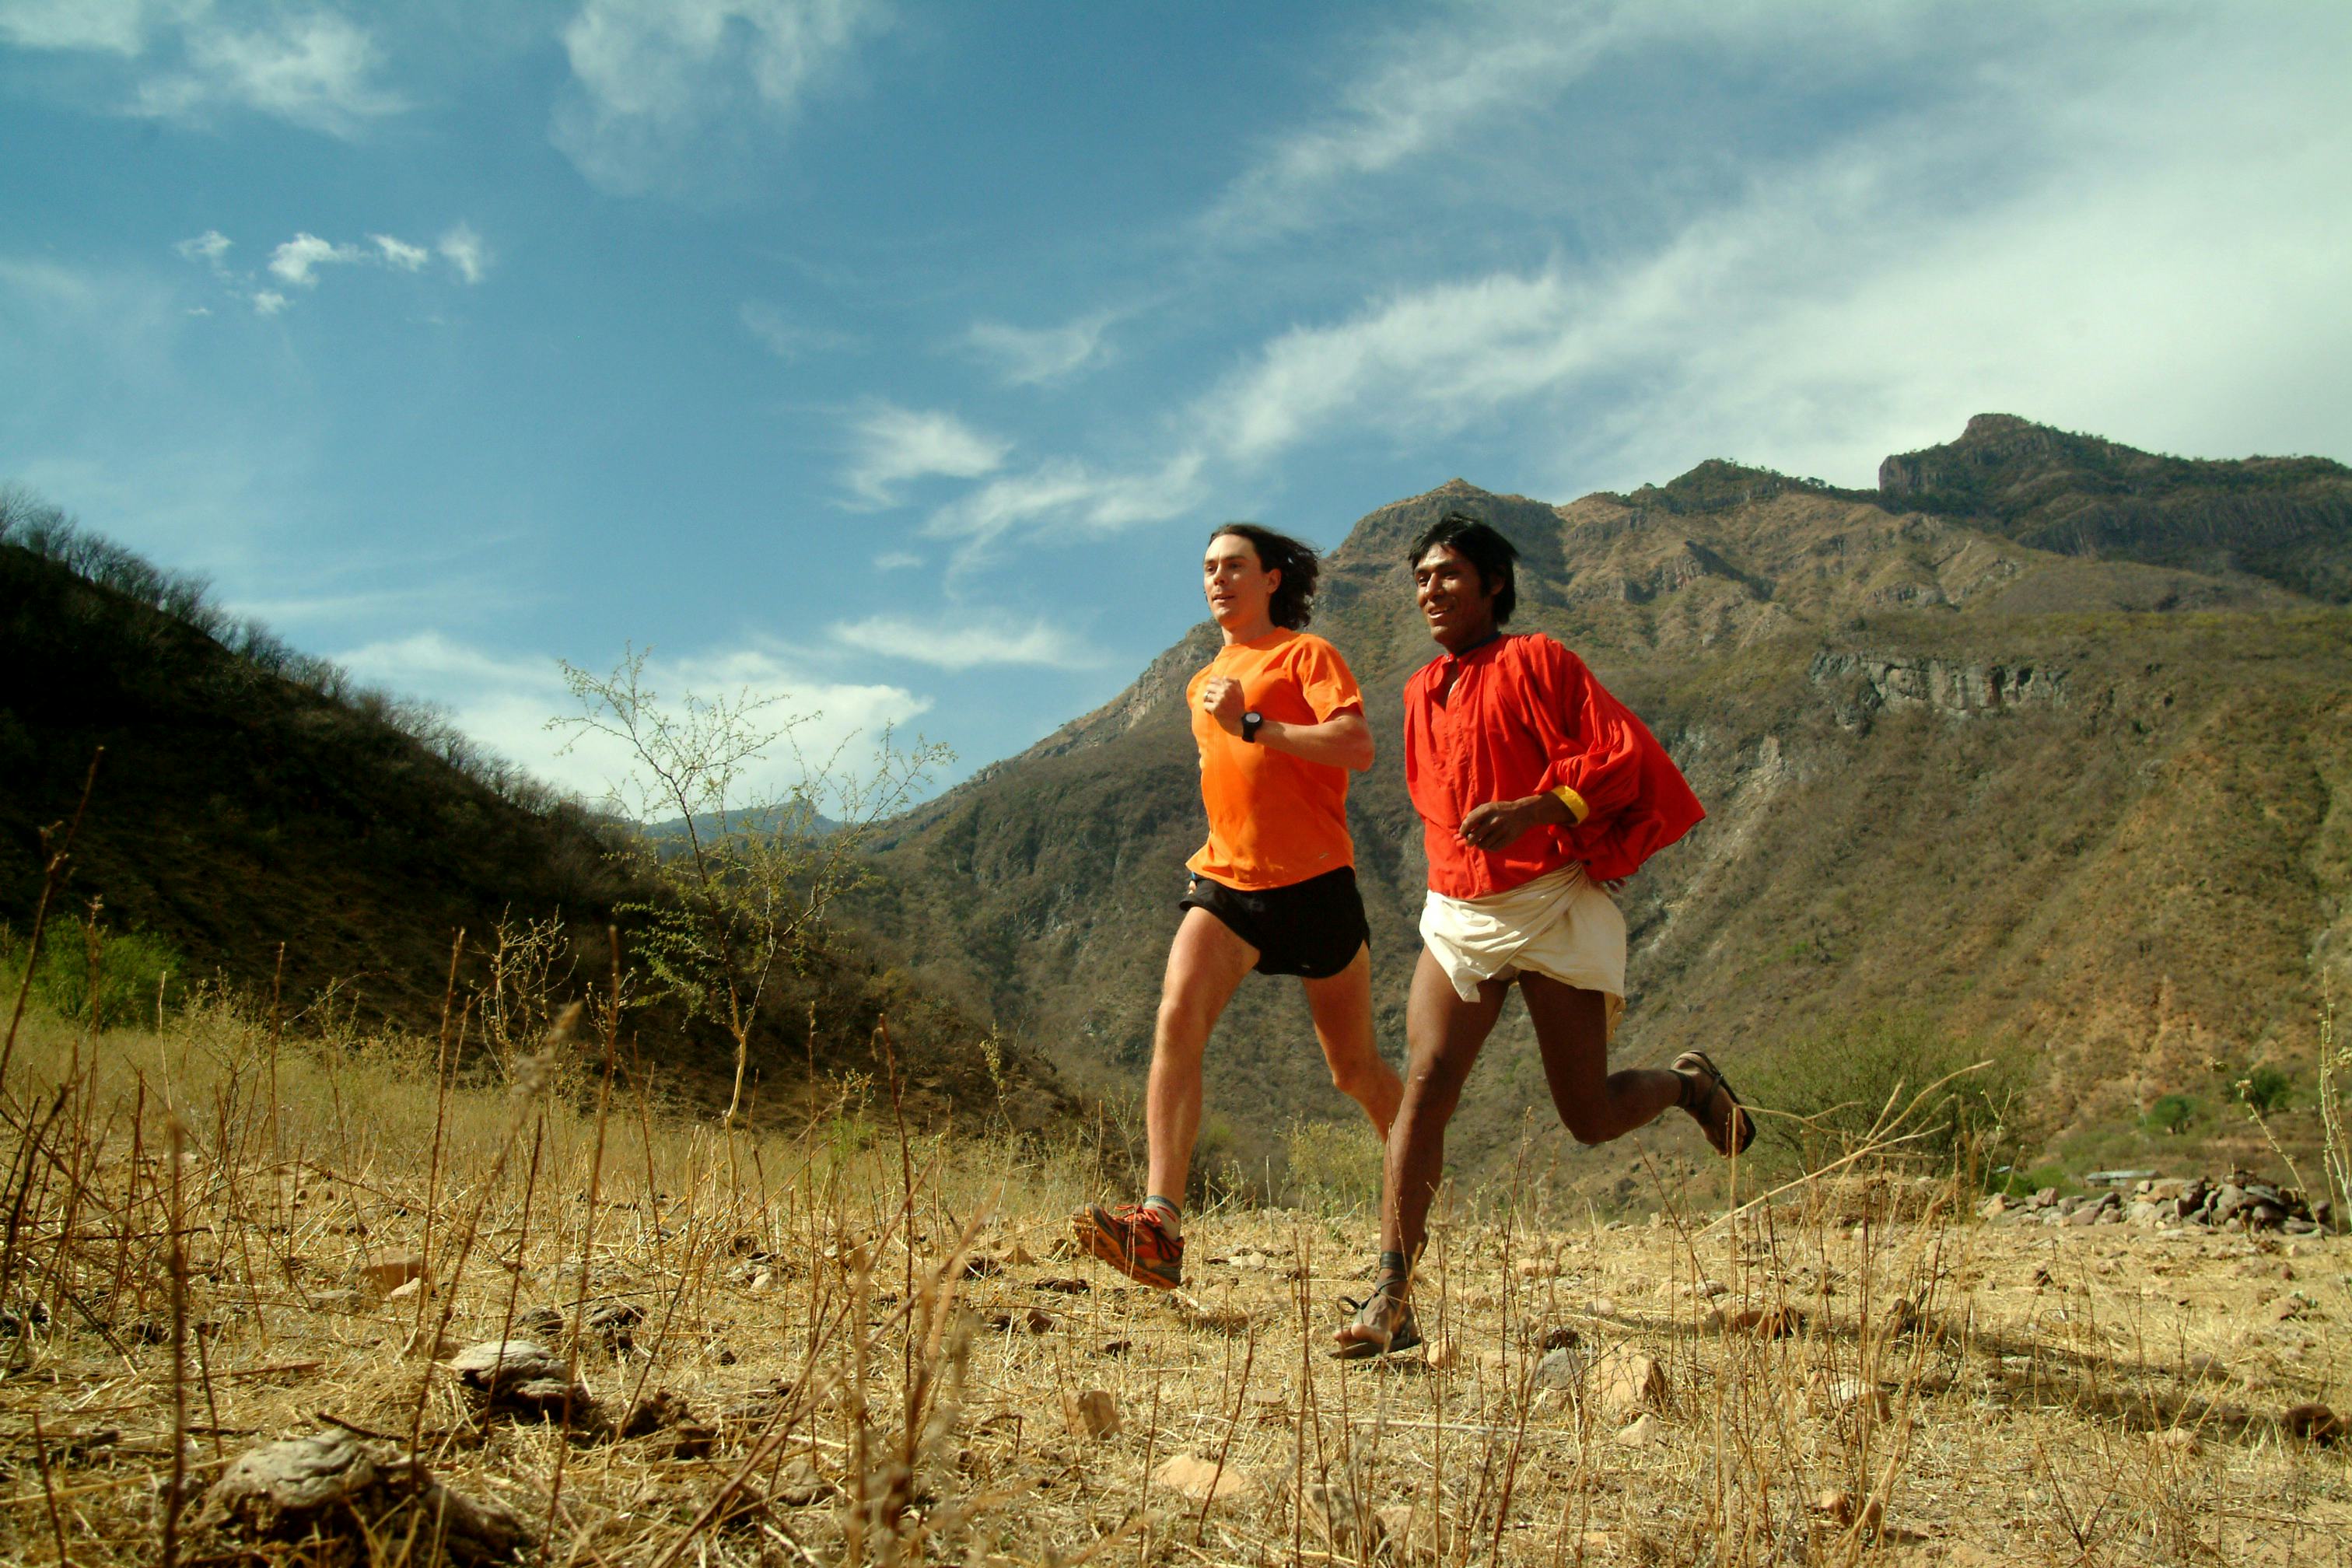 two people running in a rural setting